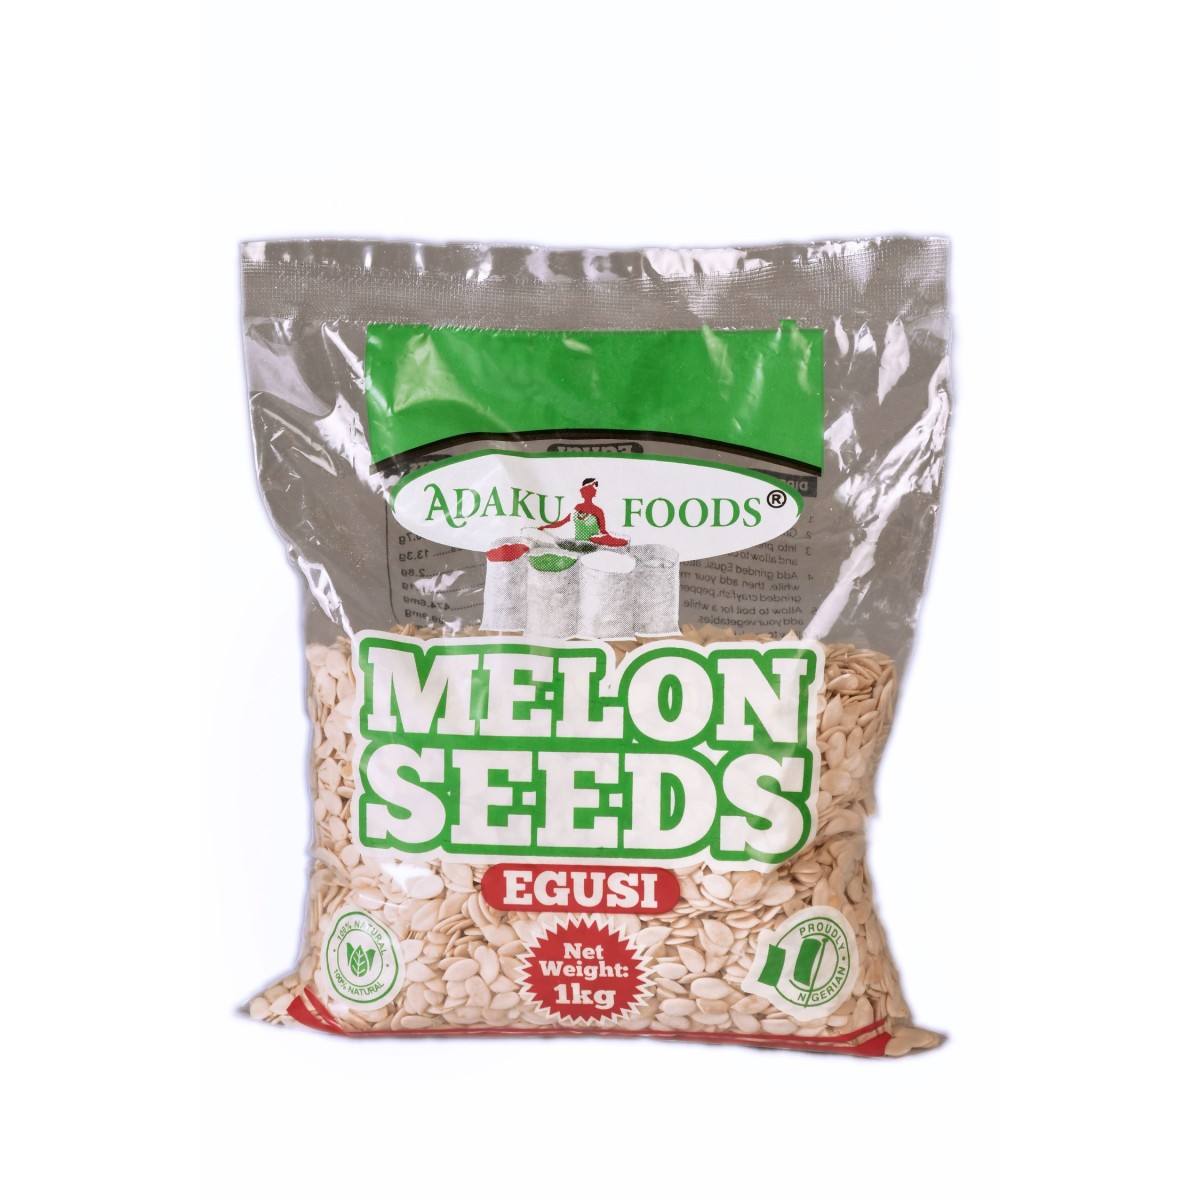 Melon Seeds 1kg with option to ground, add this to your soup list.